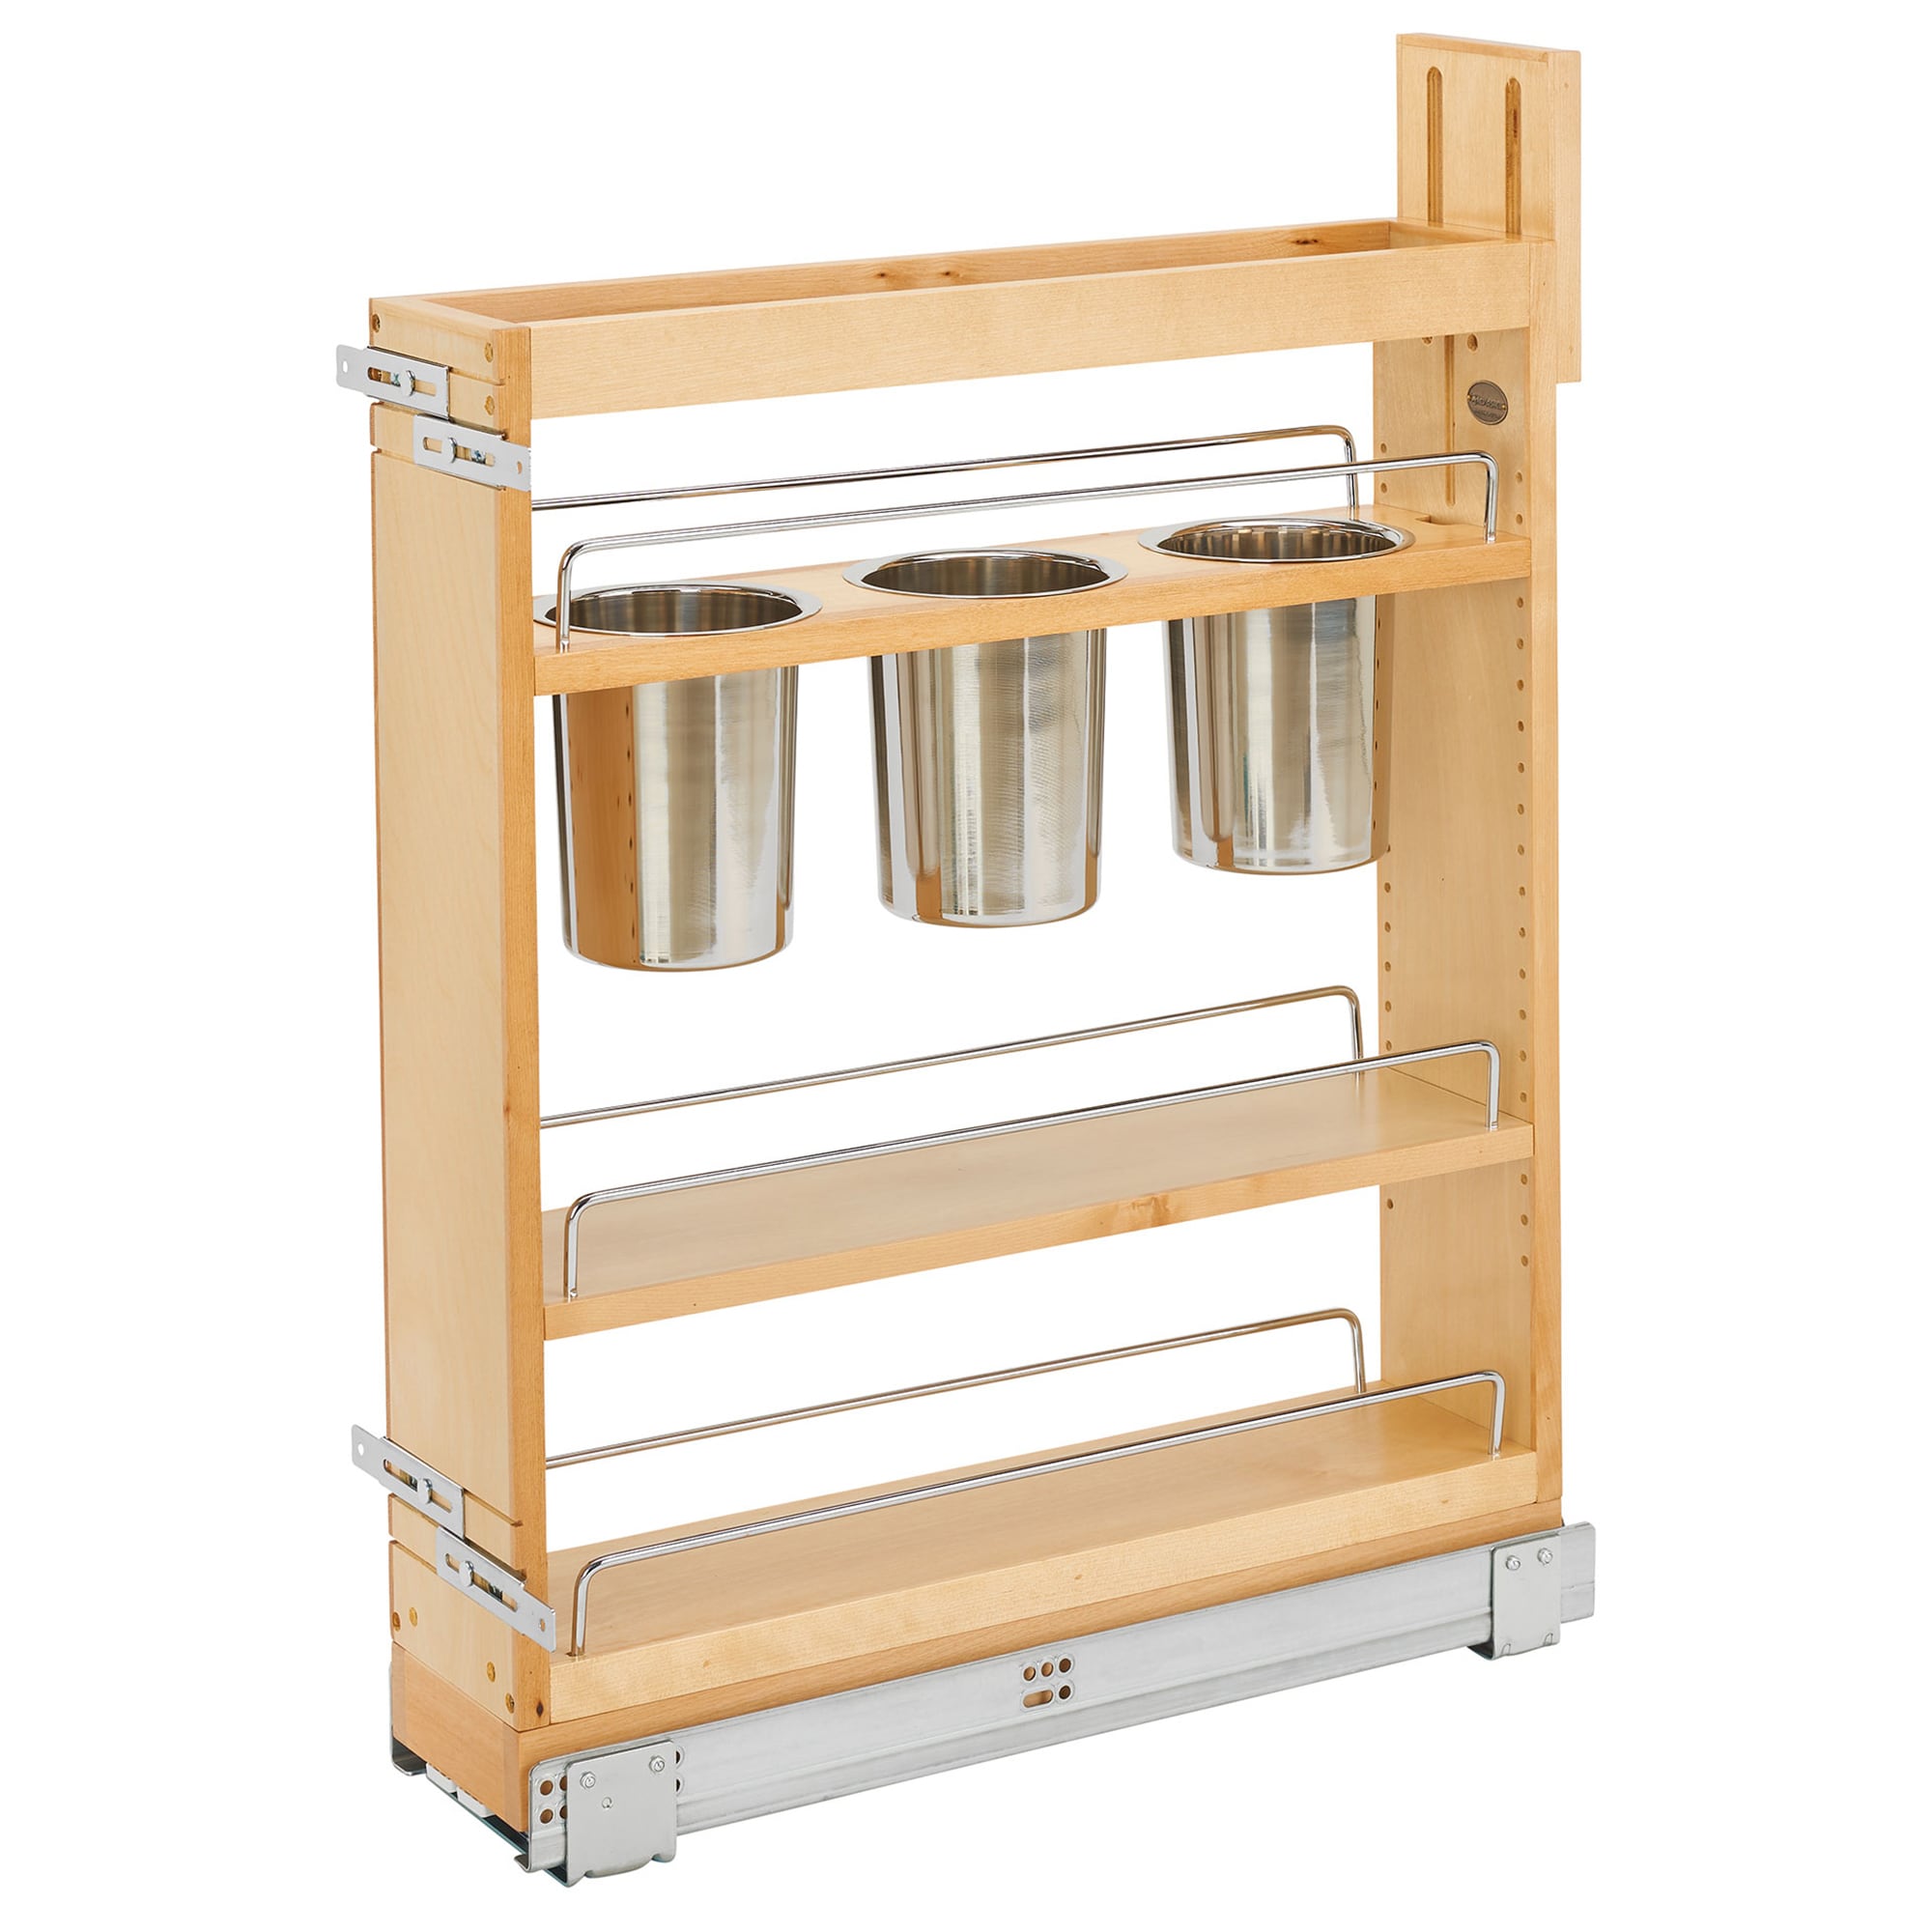 Rev-A-Shelf 8 Pull Out Cabinet Organizer Storage with Adjustable Shelves  and Soft Close Slides for Kitchen, Vanity, or Bathroom Cabinets, Maple  Wood